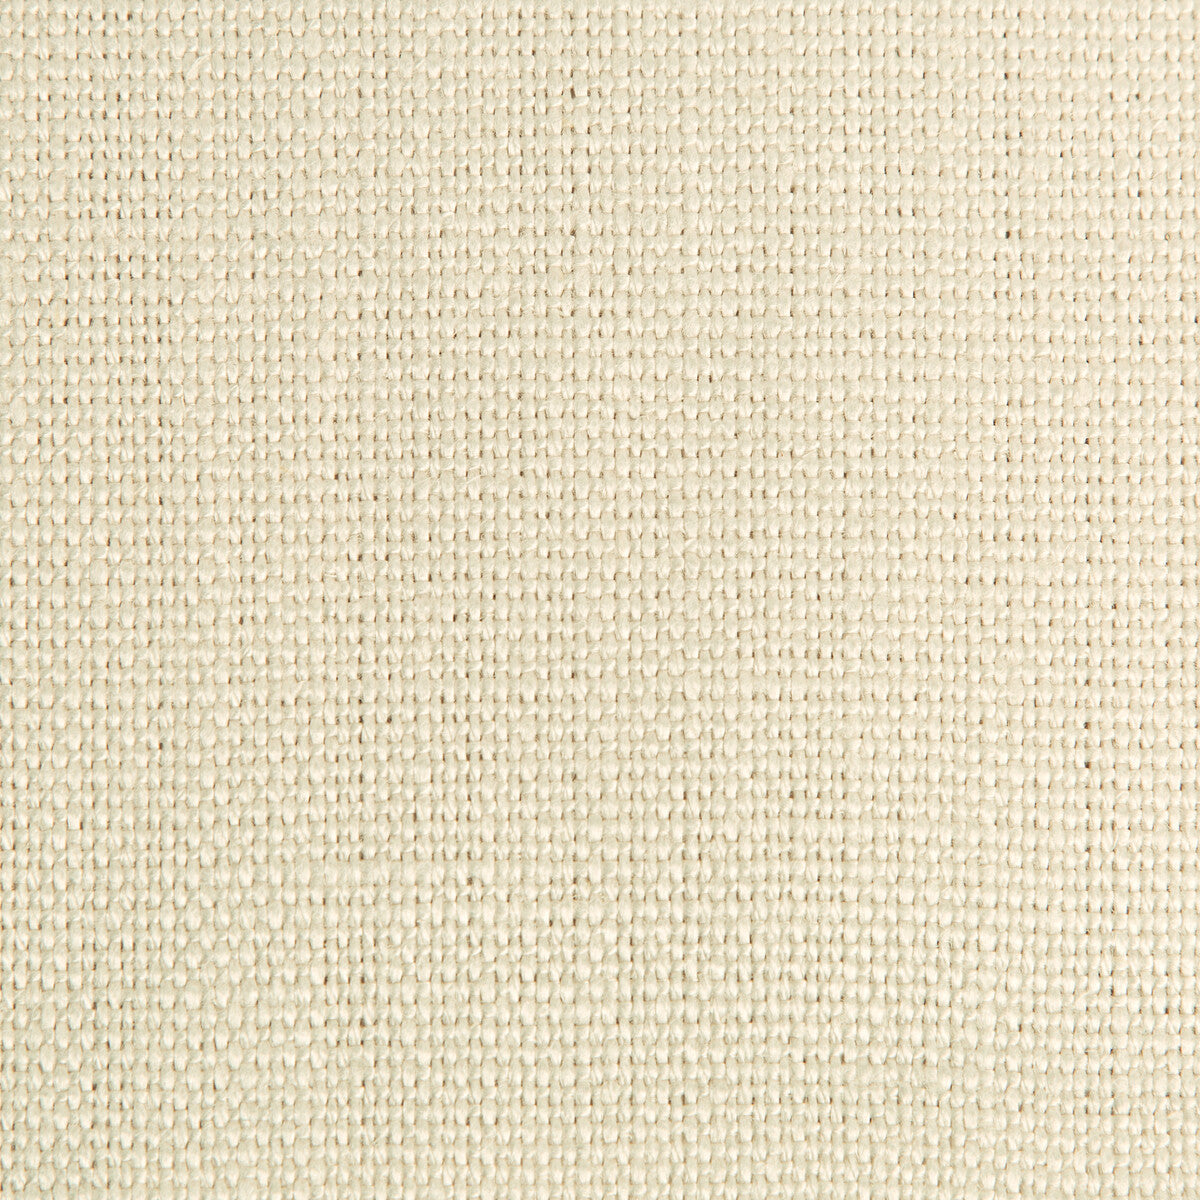 Enjoy fabric in ecru color - pattern 34643.1011.0 - by Kravet Design in the The Complete Linen IV collection